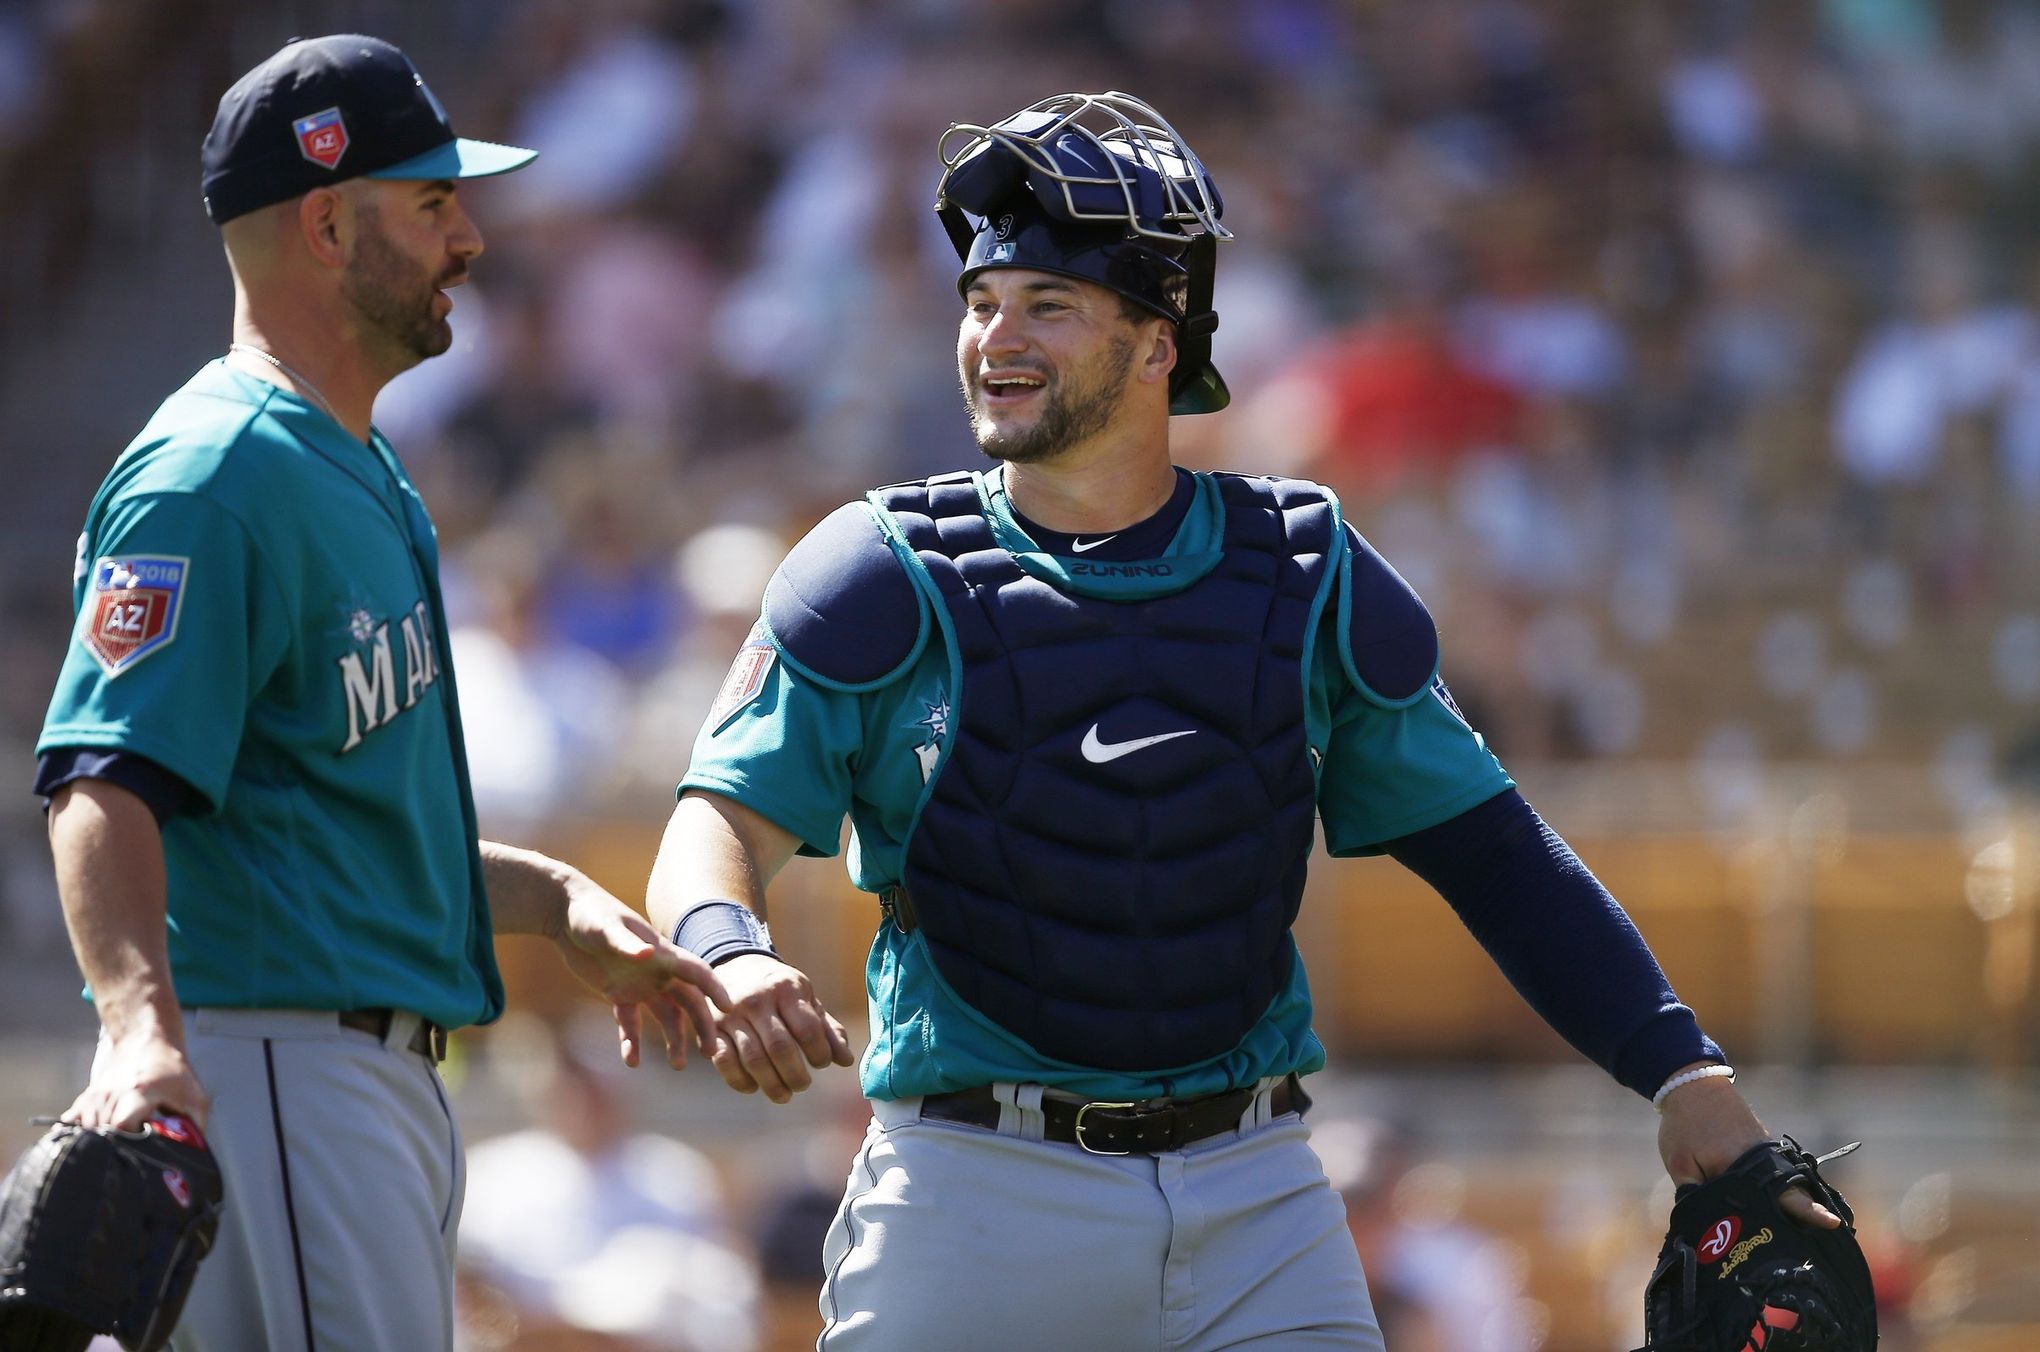 Mike Zunino hopes to be back behind the plate for the Mariners on Saturday